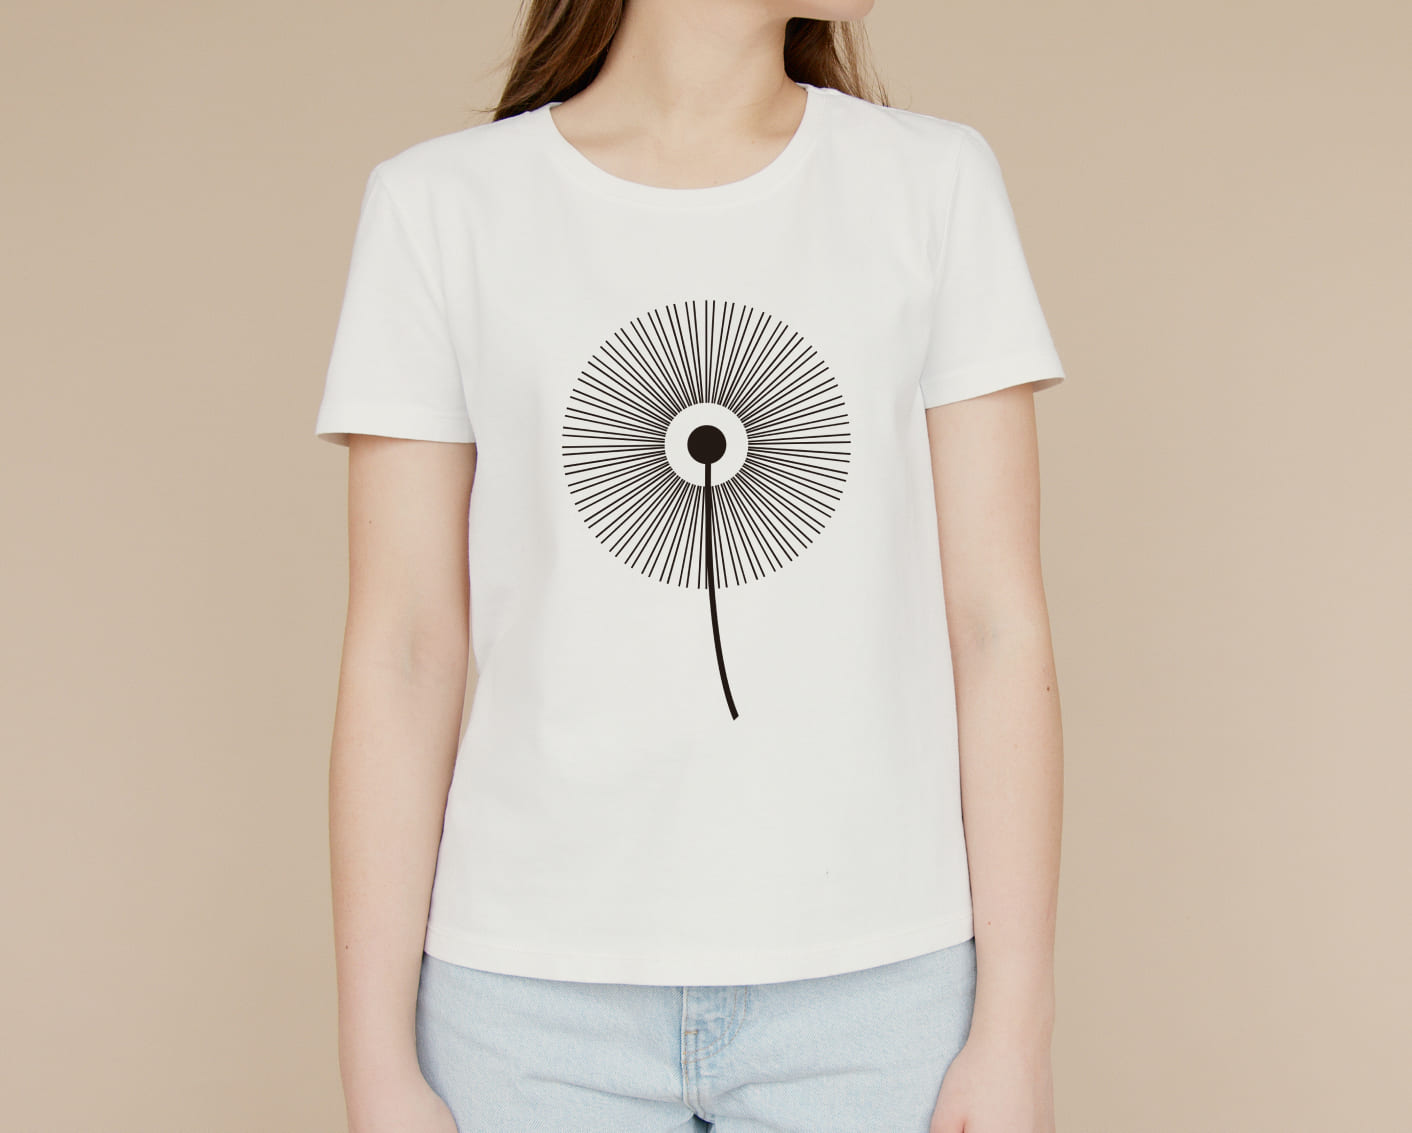 A white T-shirt with a black silhouette of a dandelion flower on a girl on a beige background.